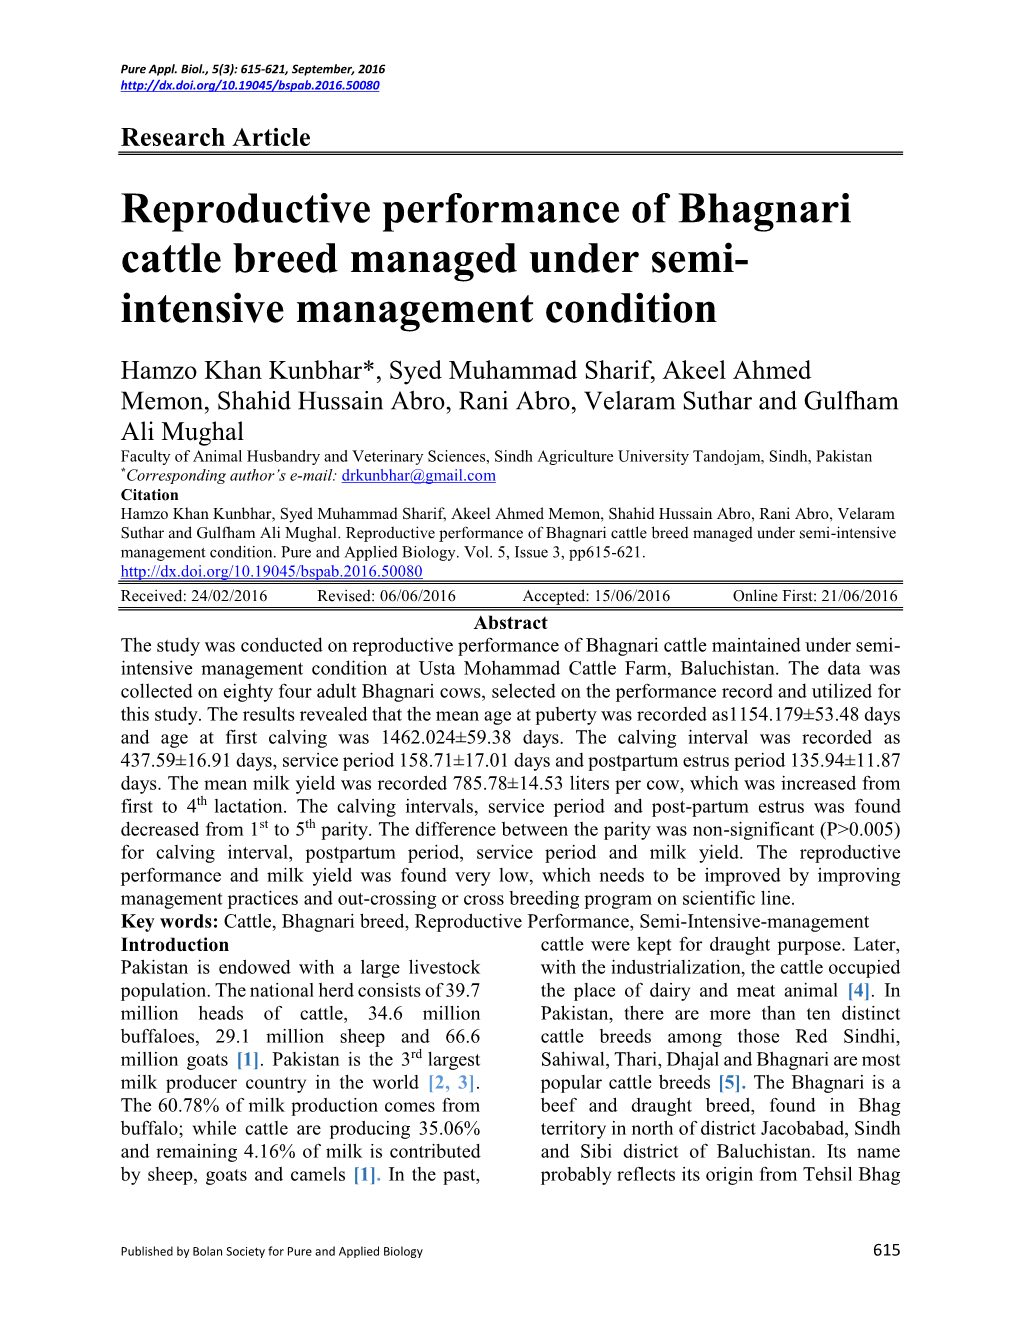 Reproductive Performance of Bhagnari Cattle Breed Managed Under Semi-Intensive Management Condition. Pure and Applied Biology. Vol. 5, Issue 3, Pp615-621